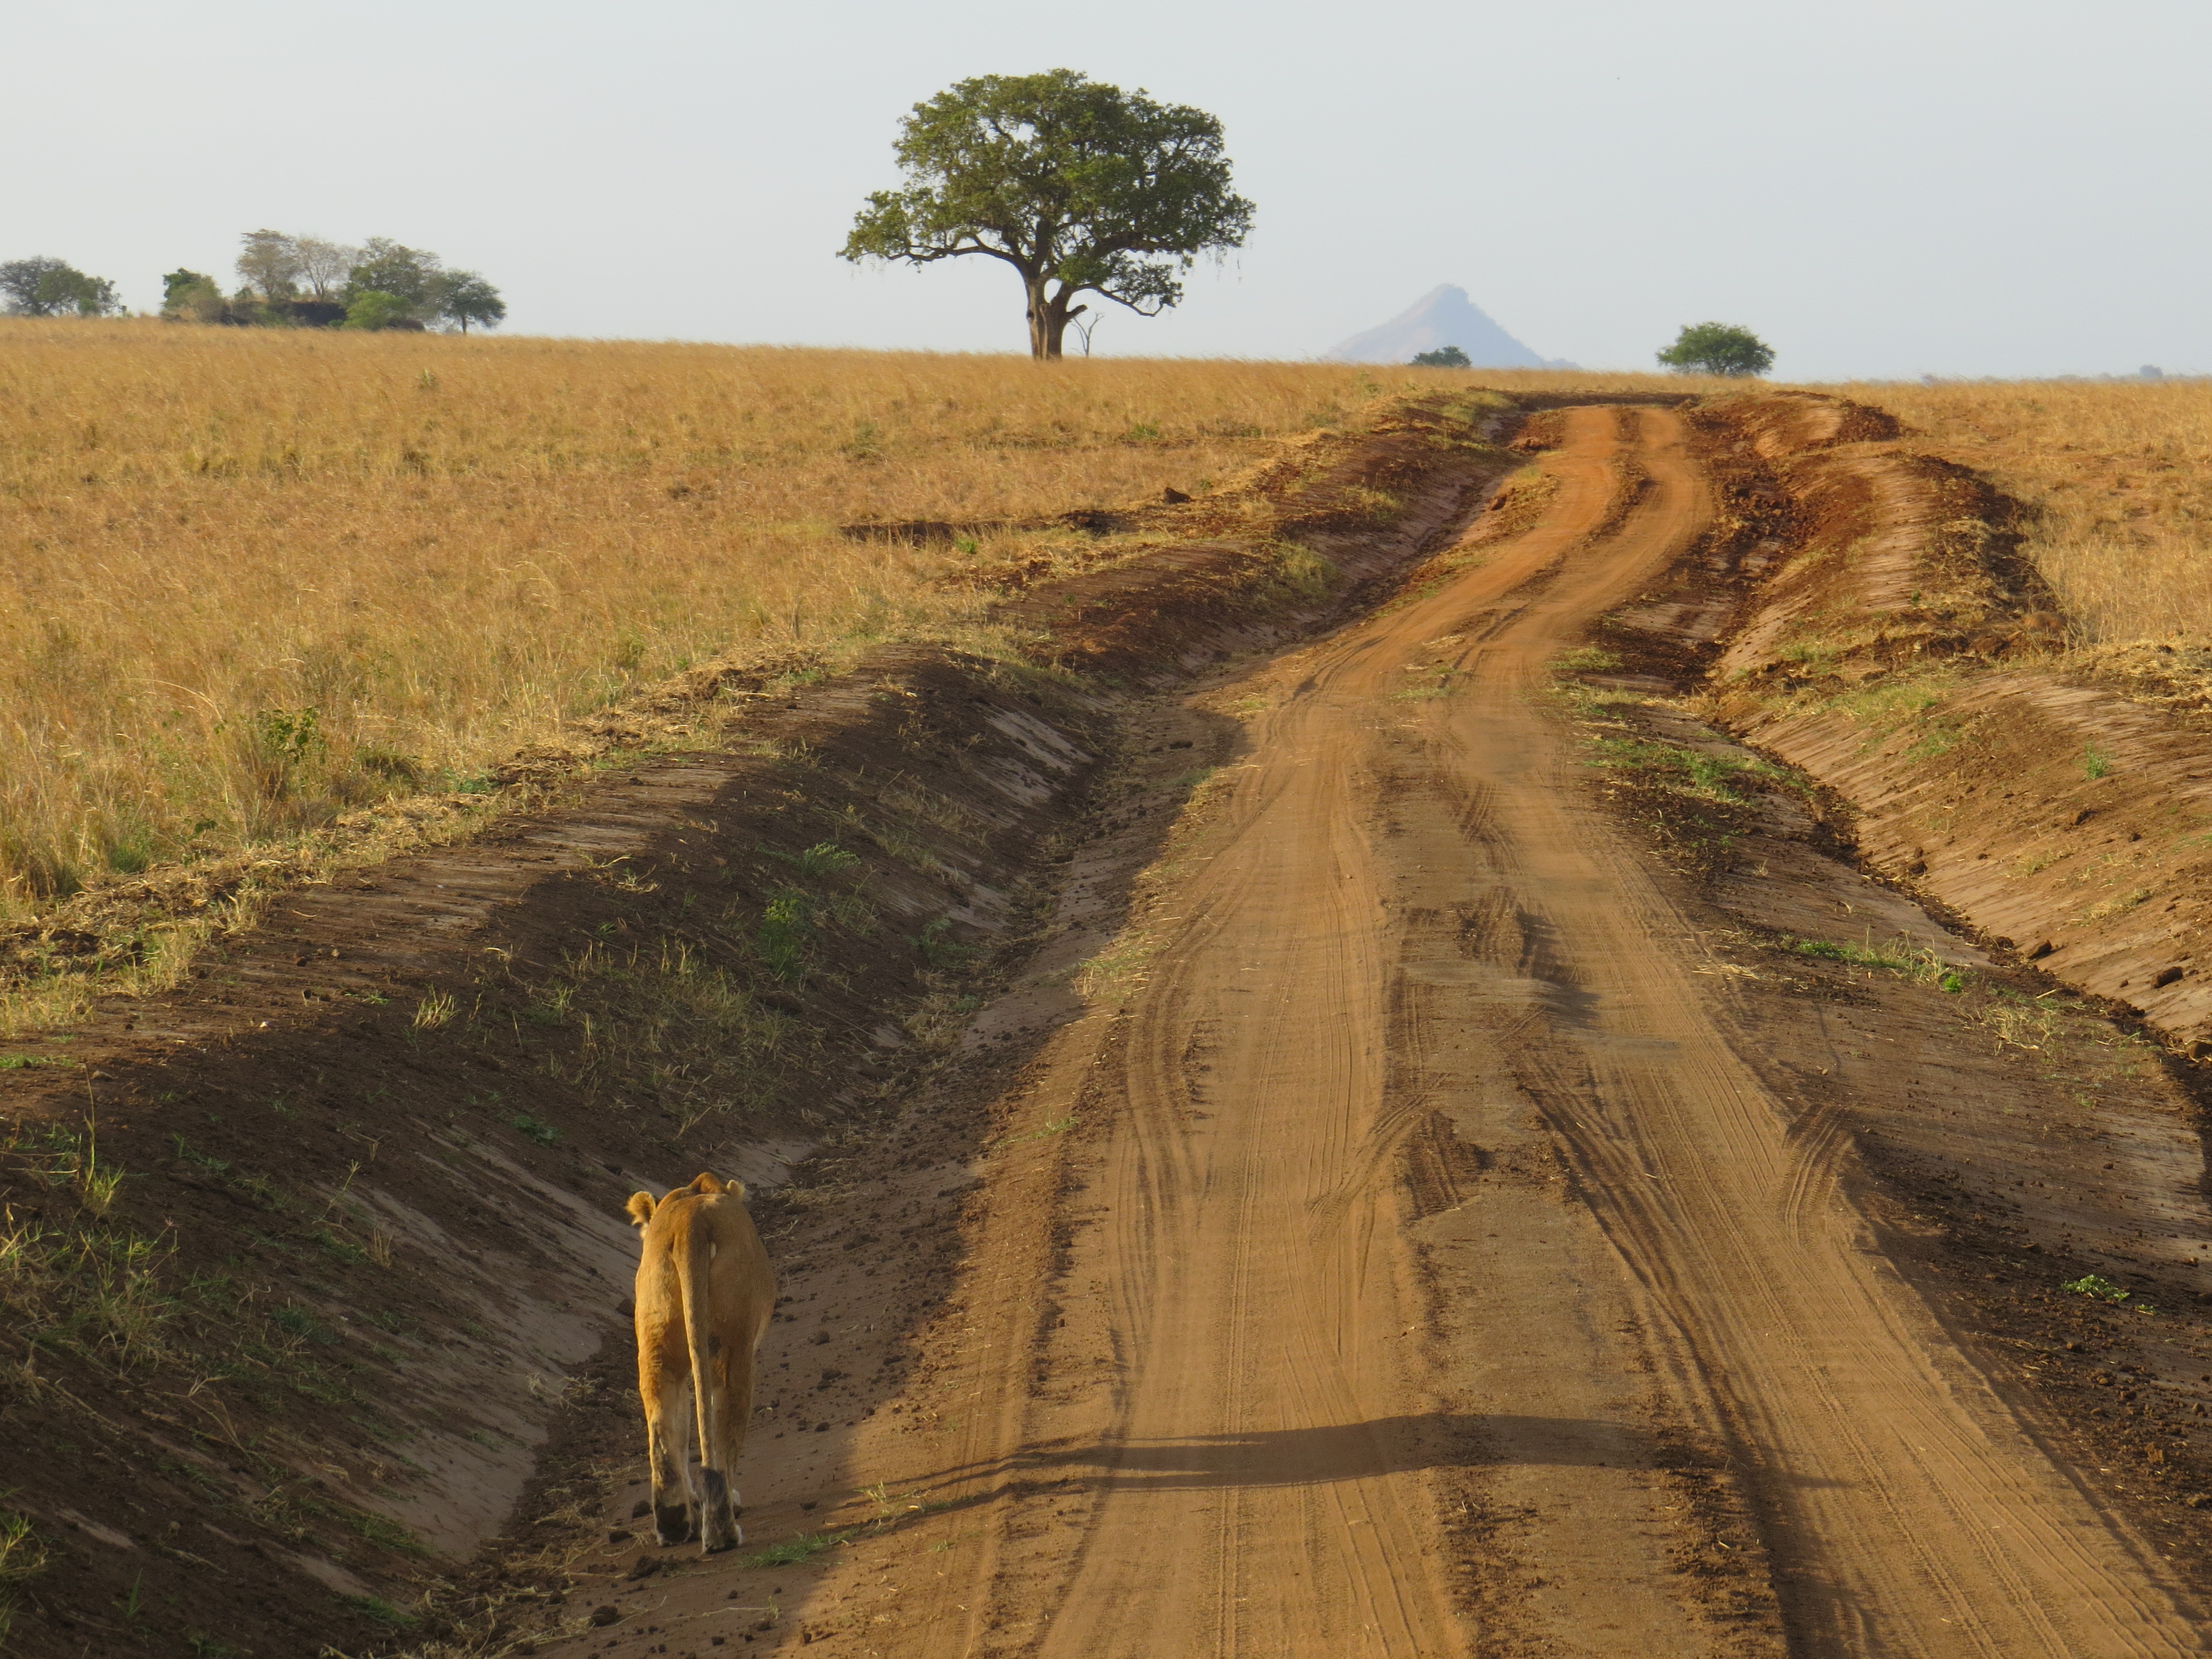 Lion in Kidepo Valley NP- Cost of Uganda safaris